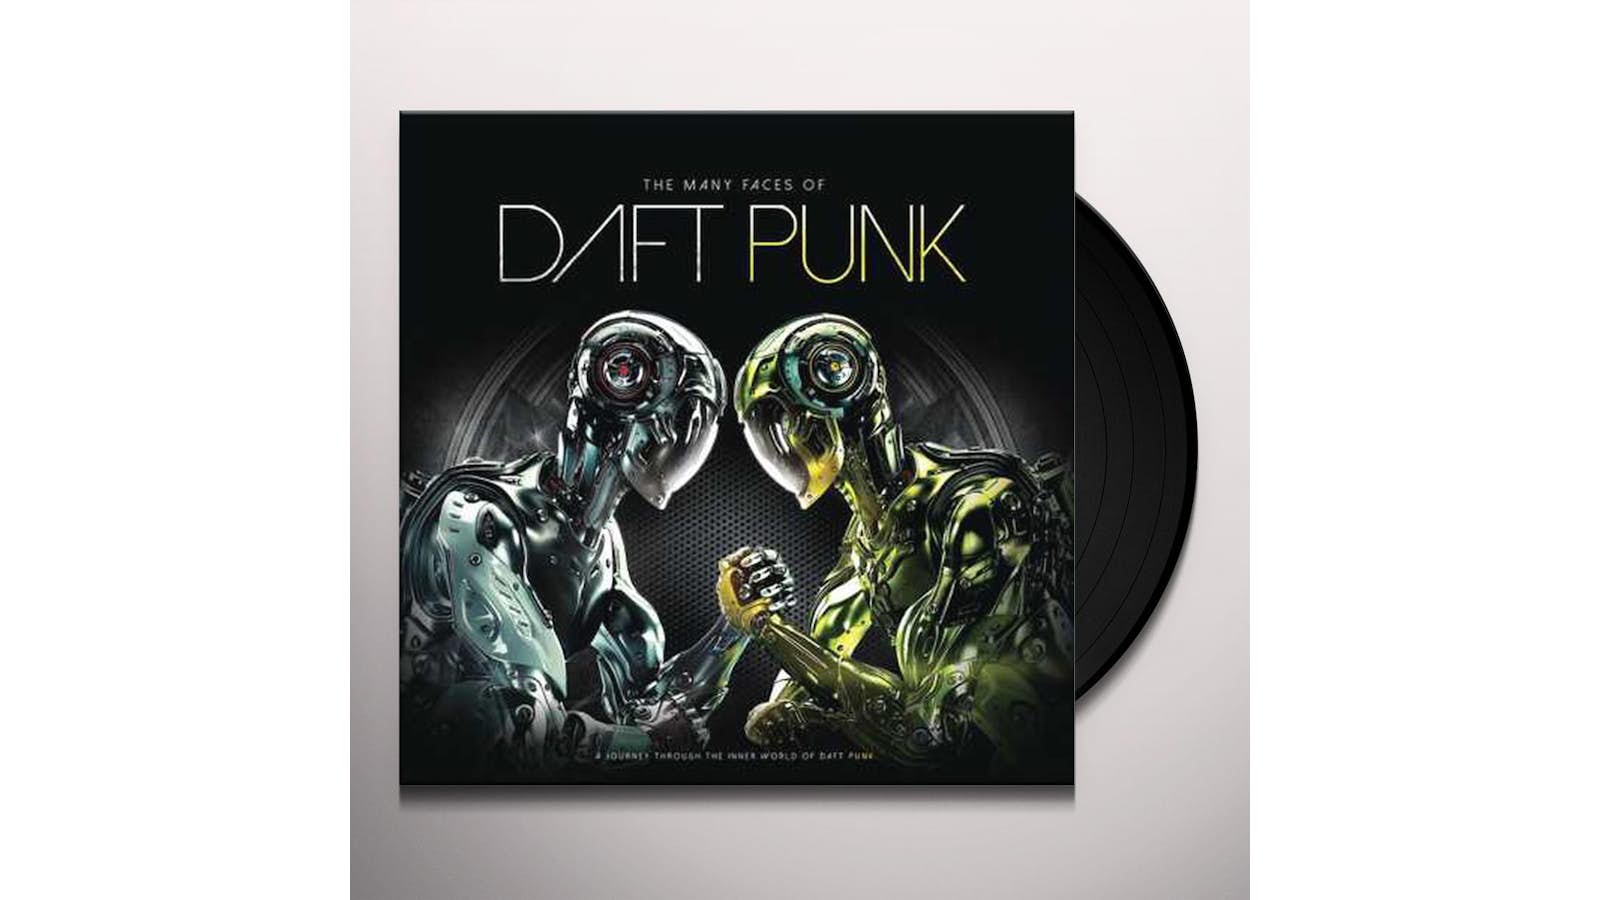 Vinilo Daft Punk The Many Faces Of